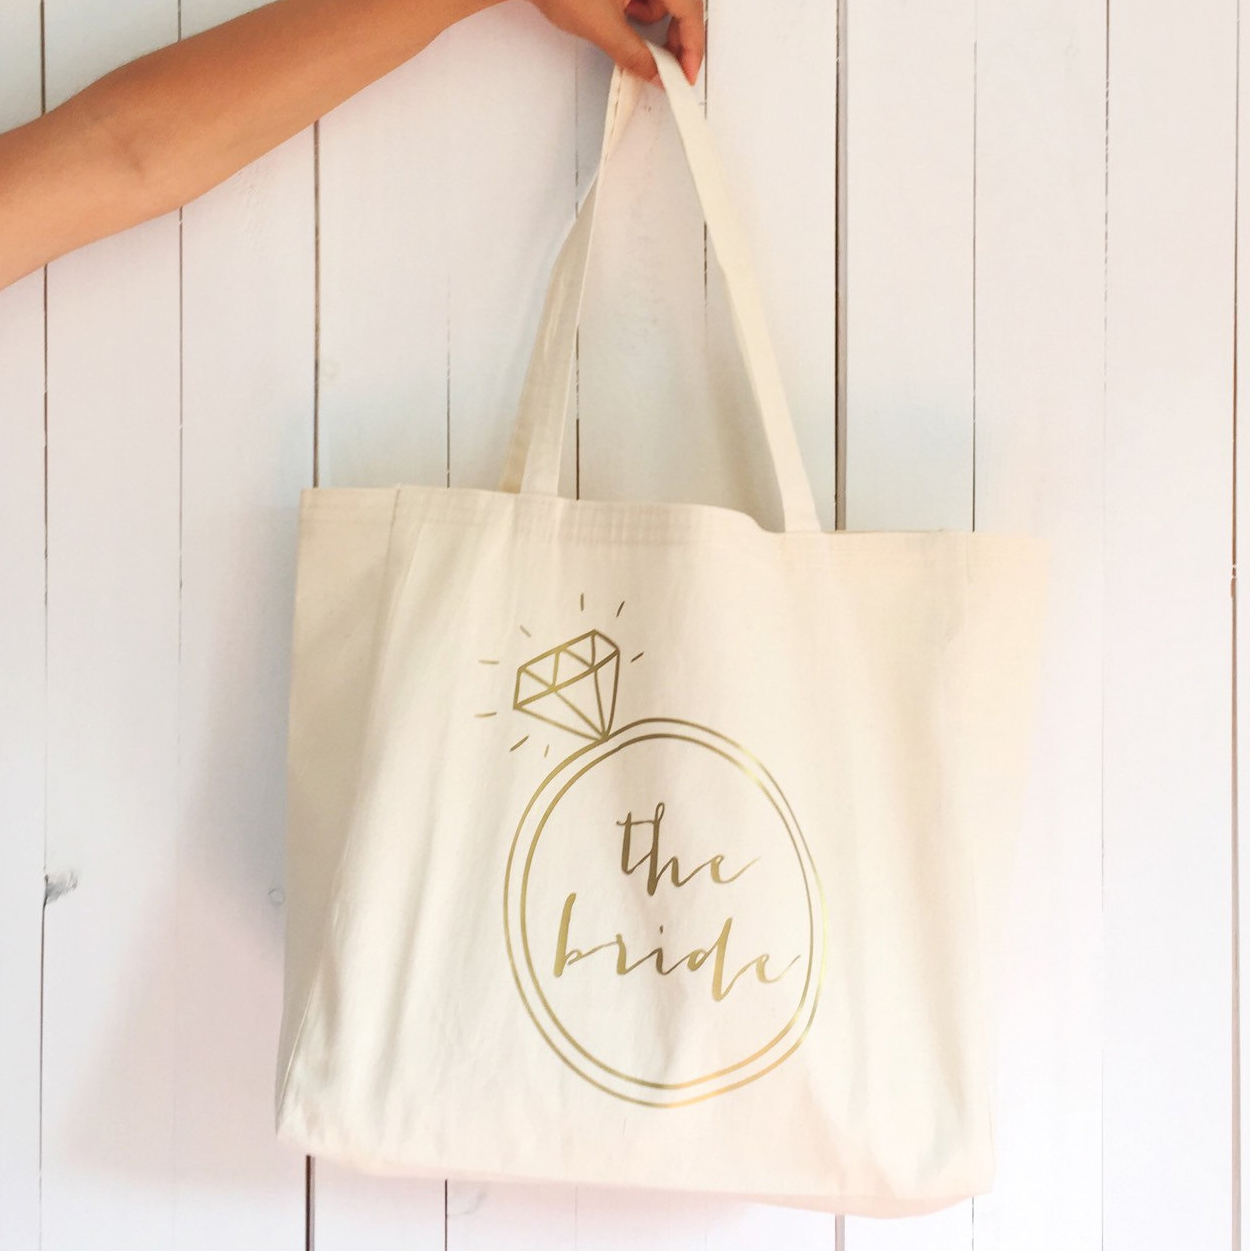 Adorable bride tote bag, awesome bride-to-be gift!